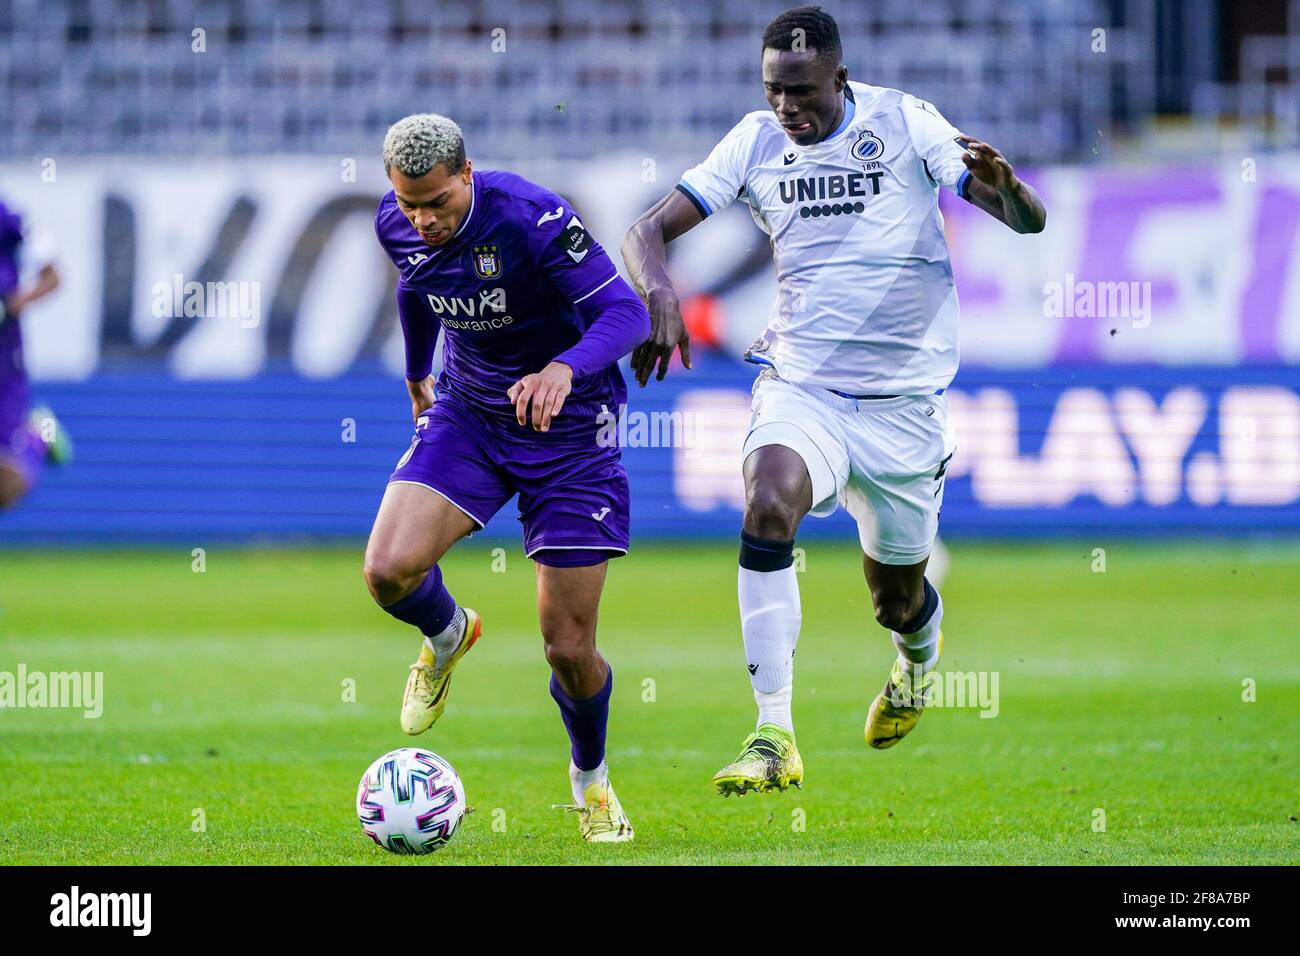 Anderlecht's Lukas Nmecha and Club's Odilon Kossounou fight for the ball  during a soccer match between RSC Anderlecht and Club Brugge KV, Sunday 11  Ap Stock Photo - Alamy